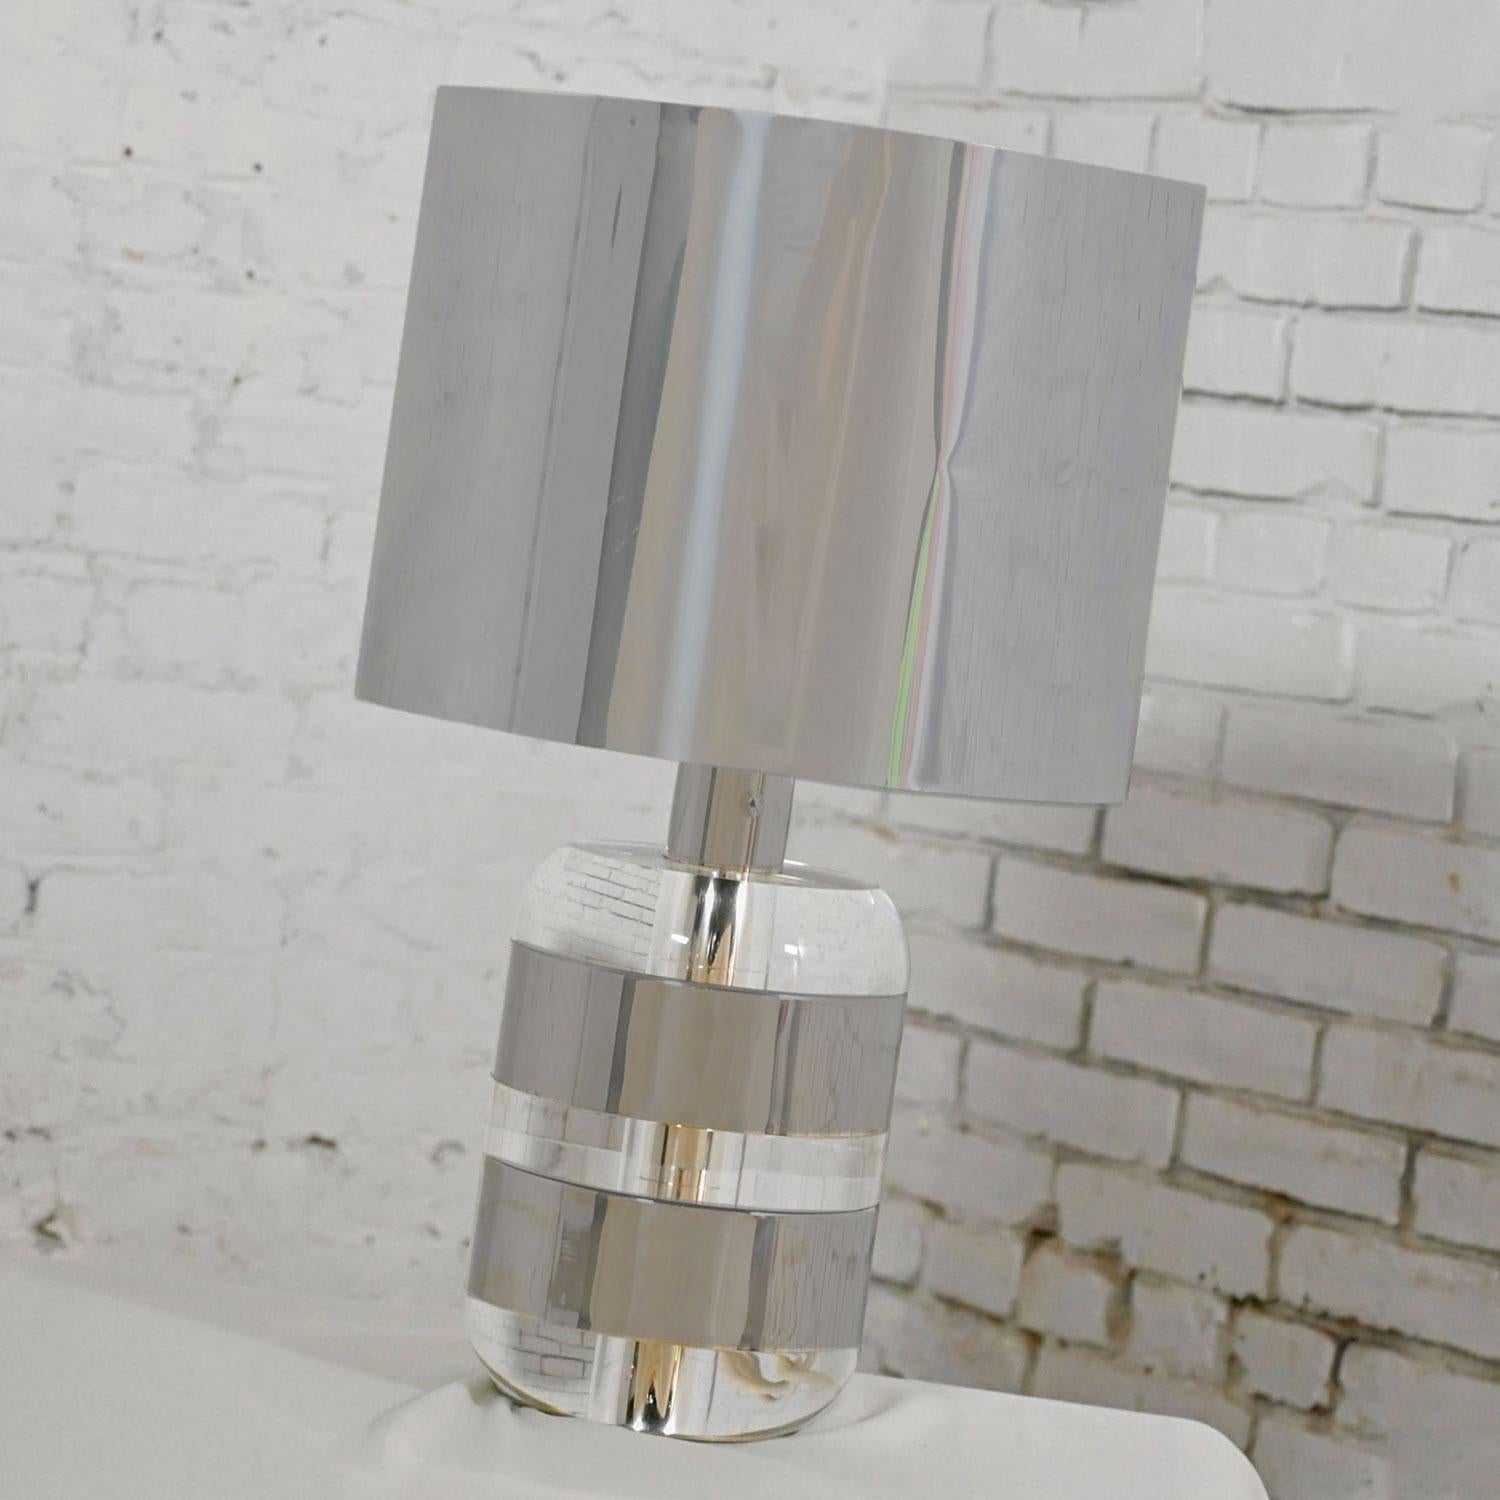 Stunning vintage Italian modern Lucite and chrome table lamp with polished aluminum shade, chrome shaft, and solid Lucite and chrome stacked discs by Noel B.C. Italy. Beautiful condition, keeping in mind that this is vintage and not new so will have